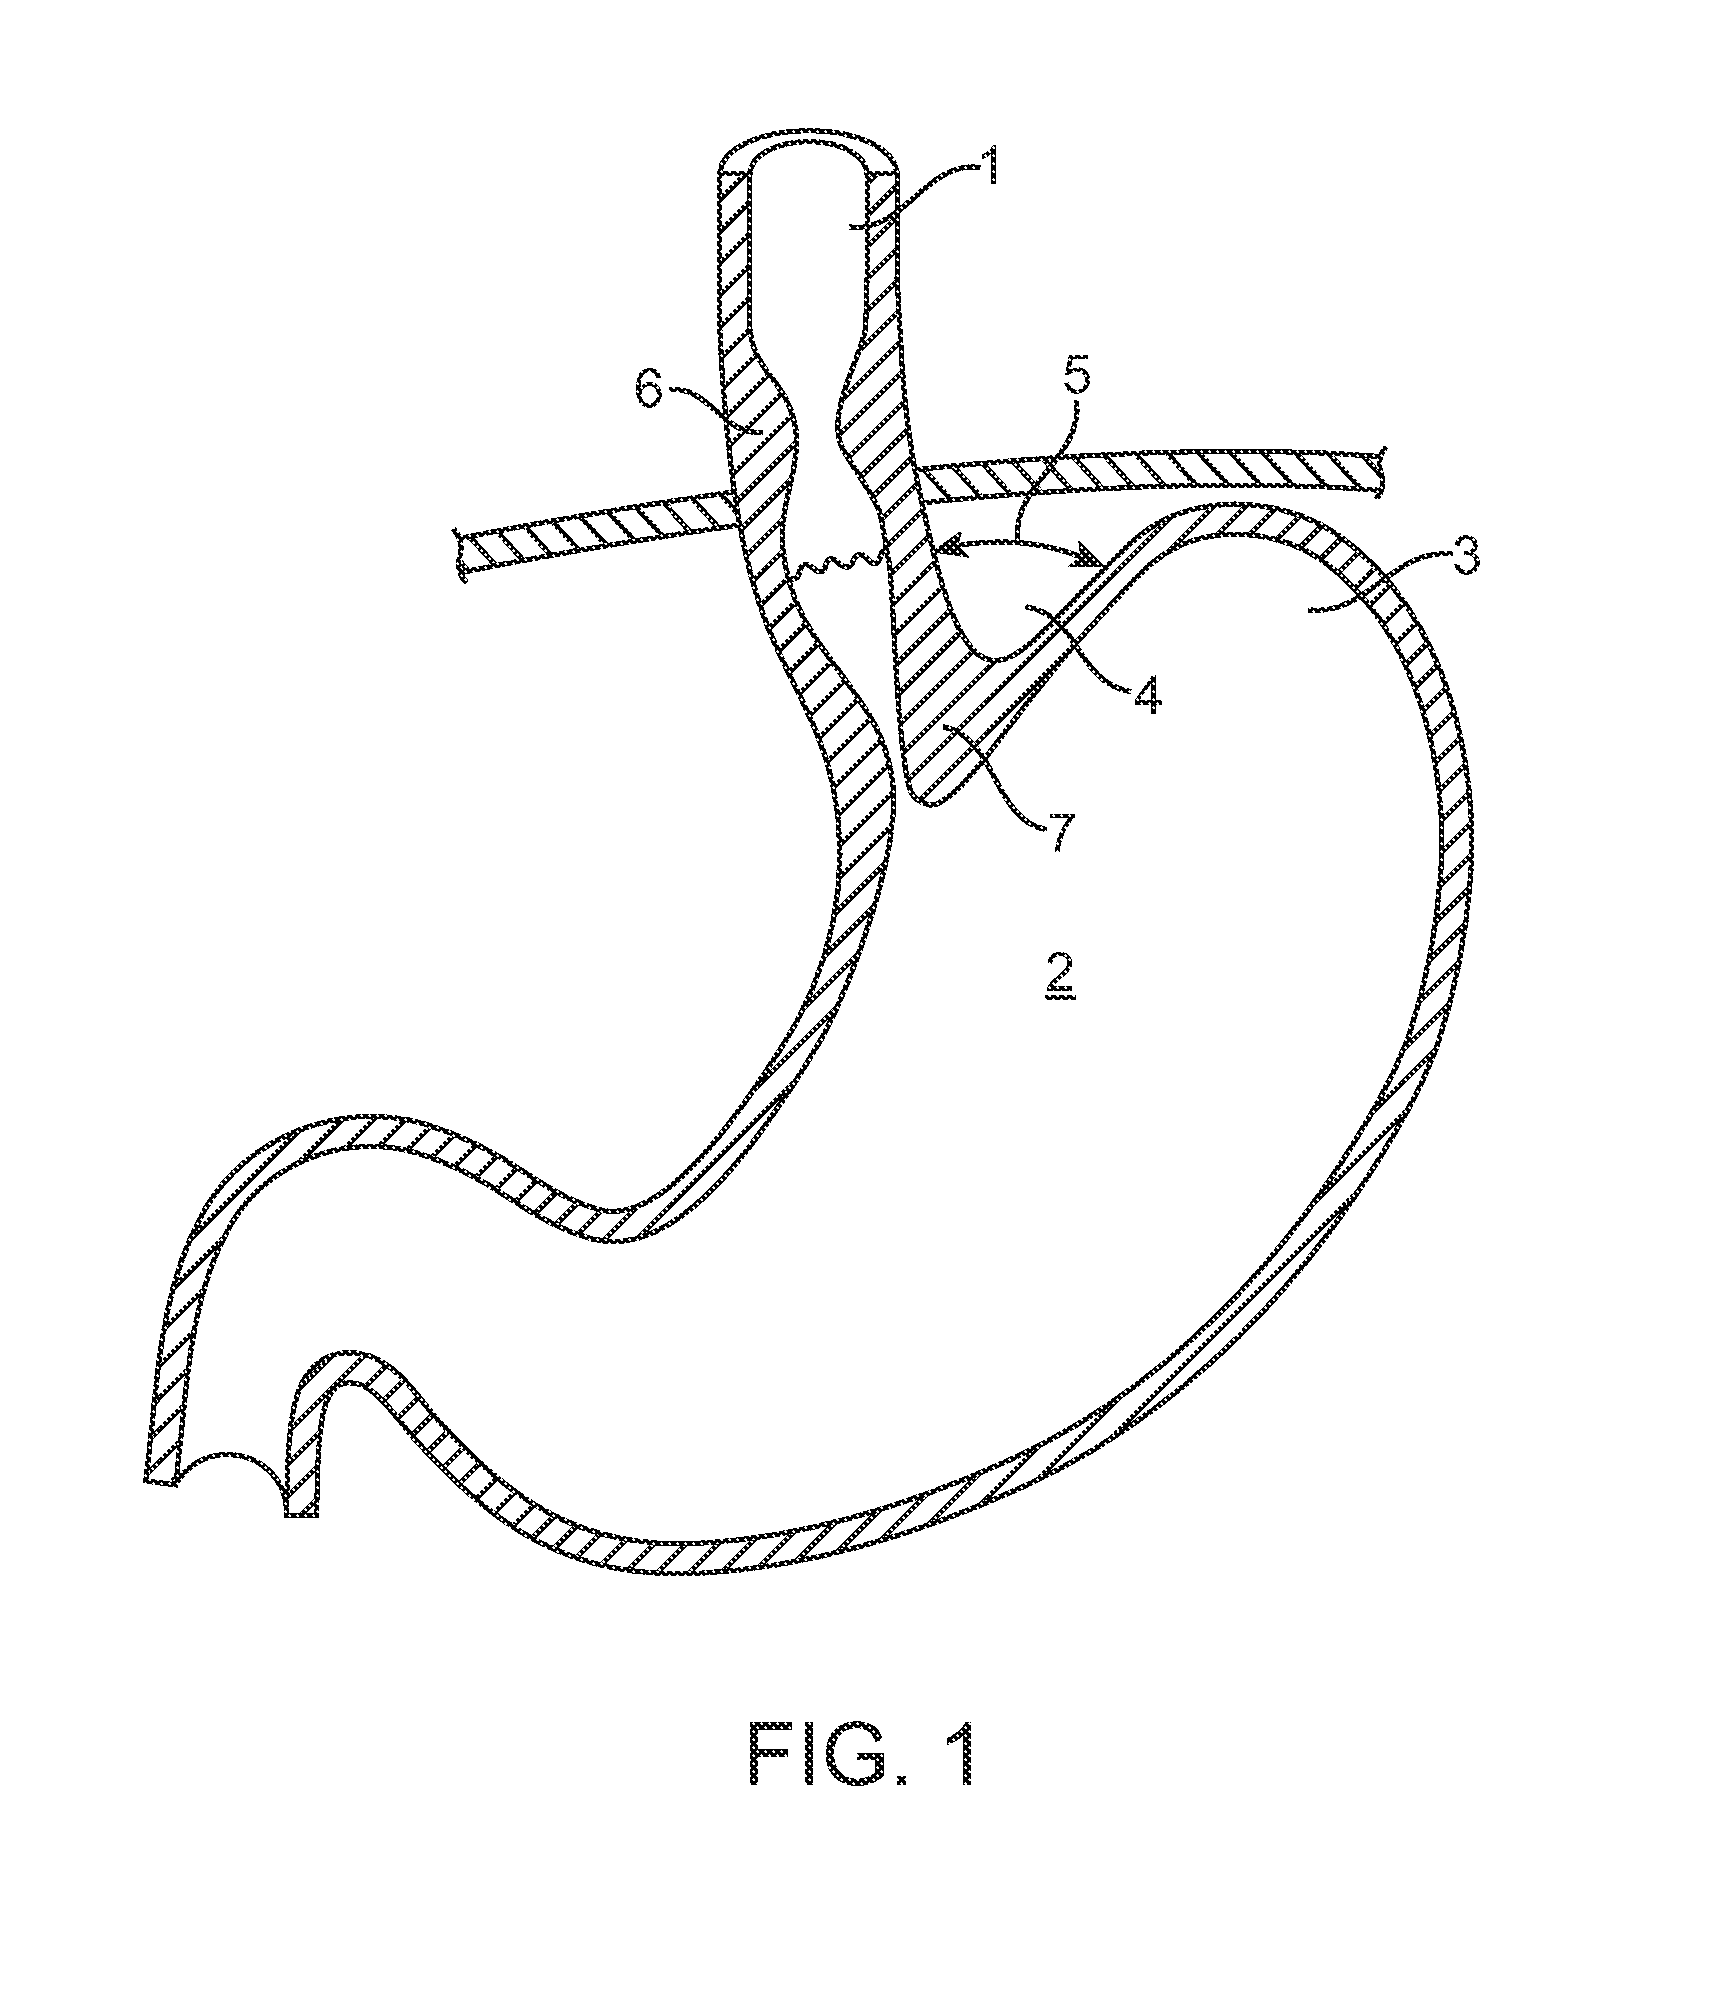 Methods and devices for anchoring to tissue